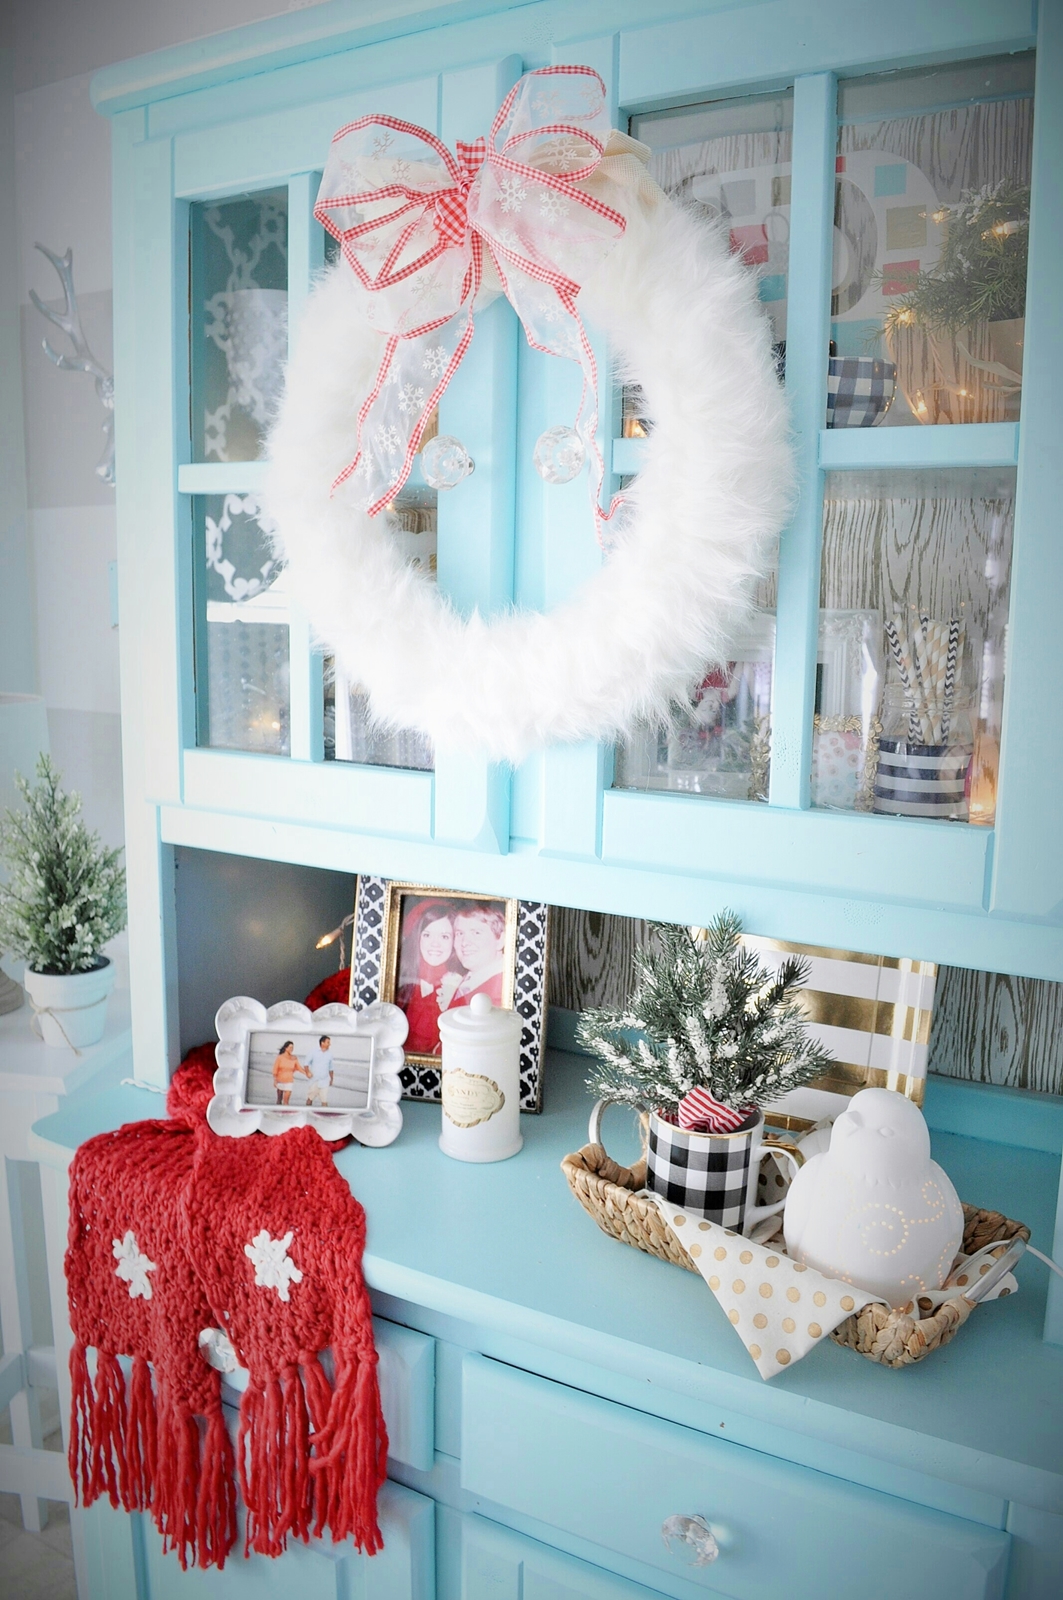 Reader’s Christmas Home Tour – Day 3!